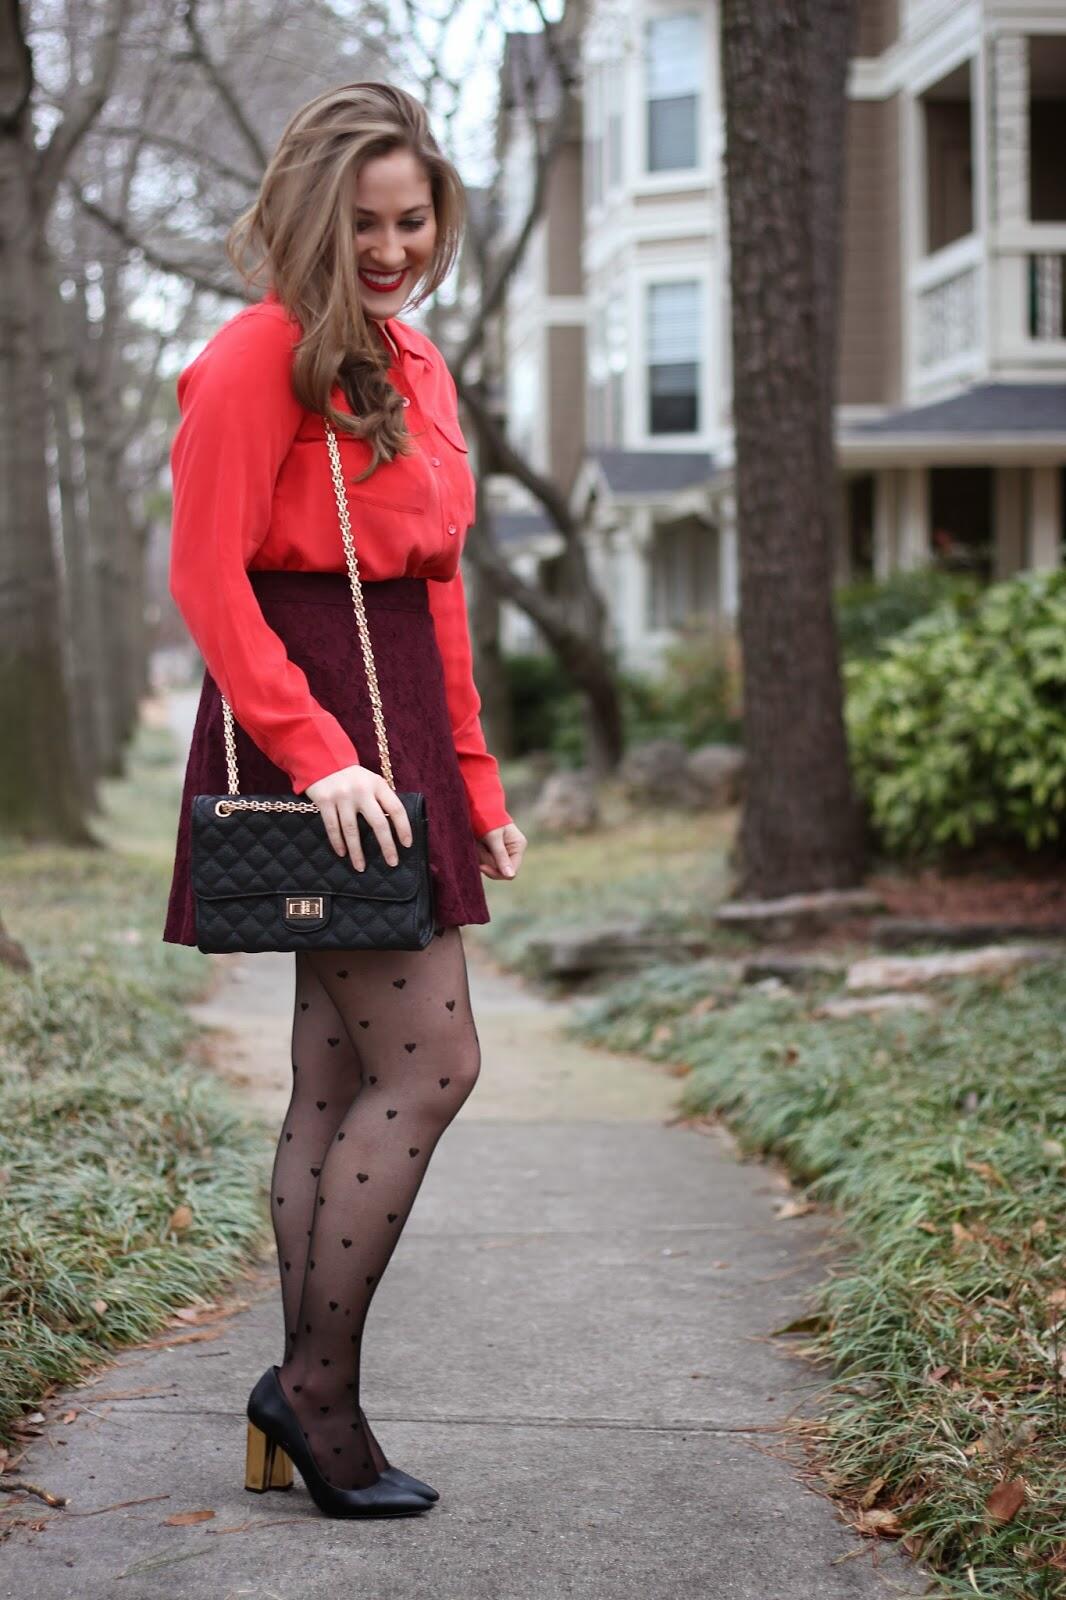 A Valentine's Day outfit - Red dress and polka dot tights - Fashion Tights